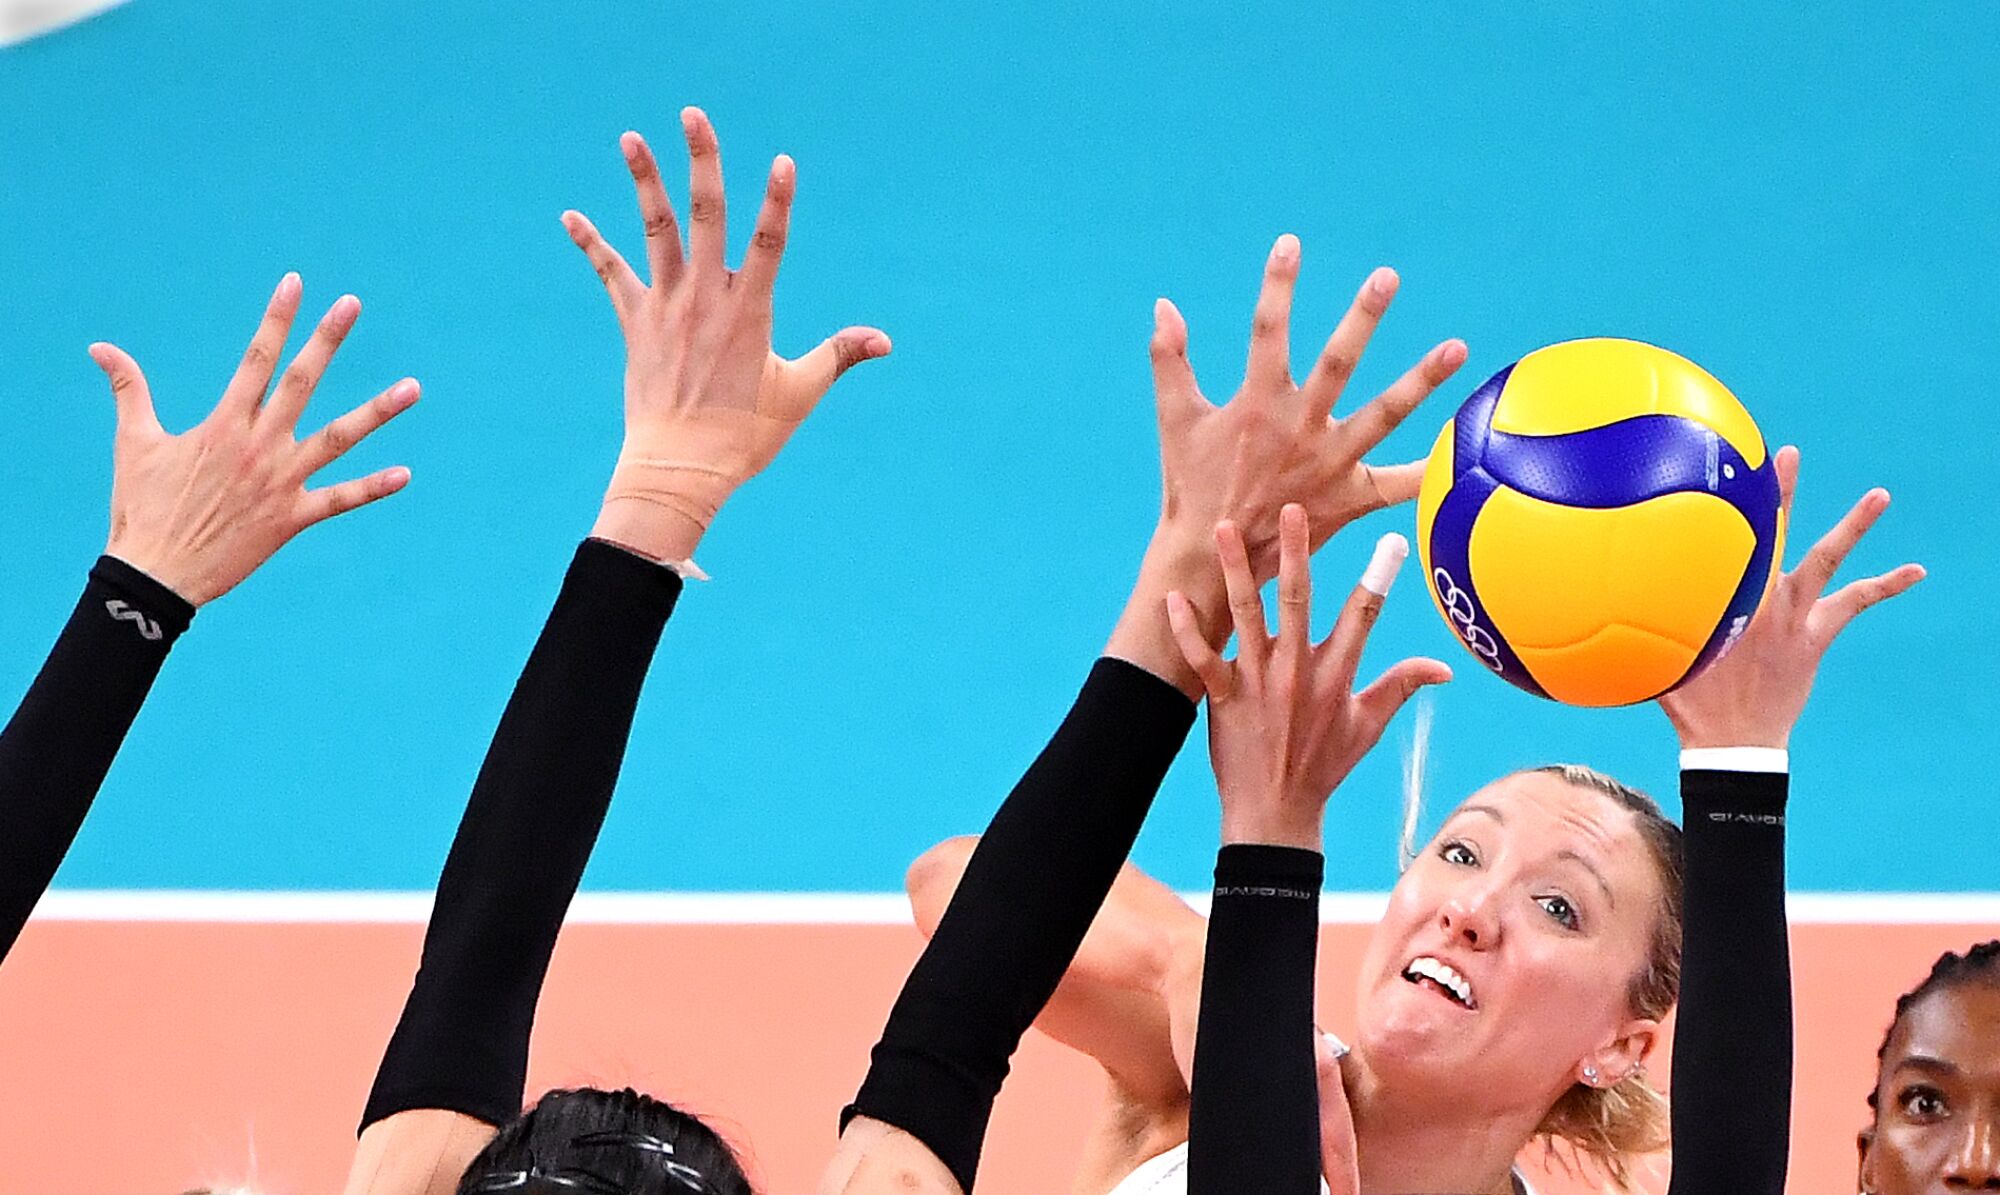 A woman leaps for a volleyball amid numerous outstretched arms.